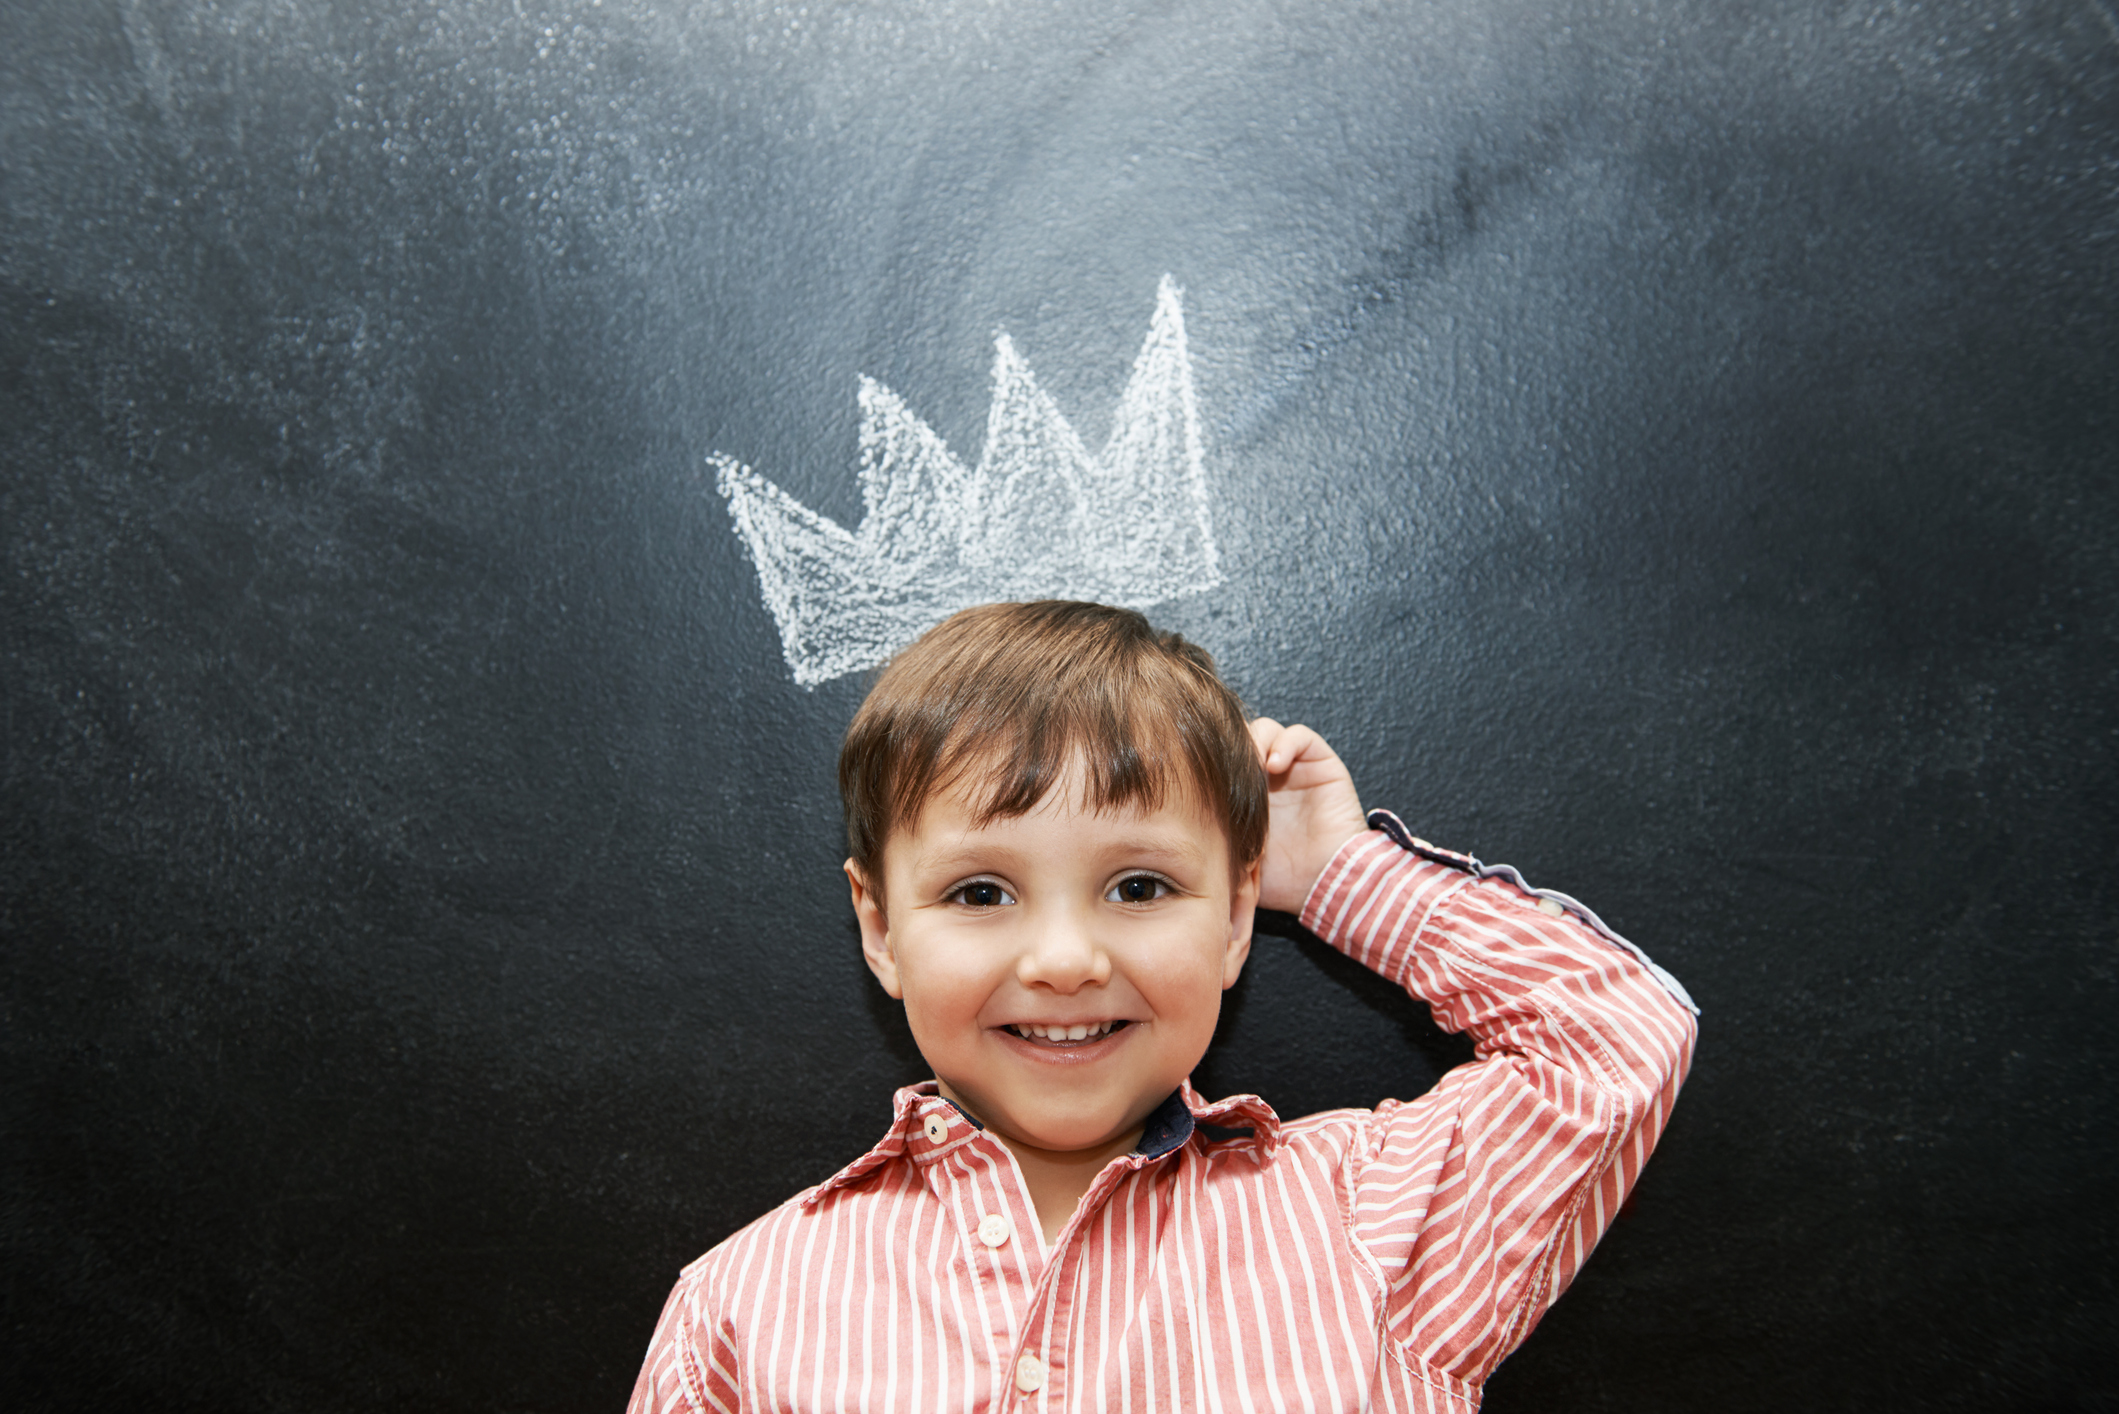 A boy is standing next to a blackboard with a crown drawing.